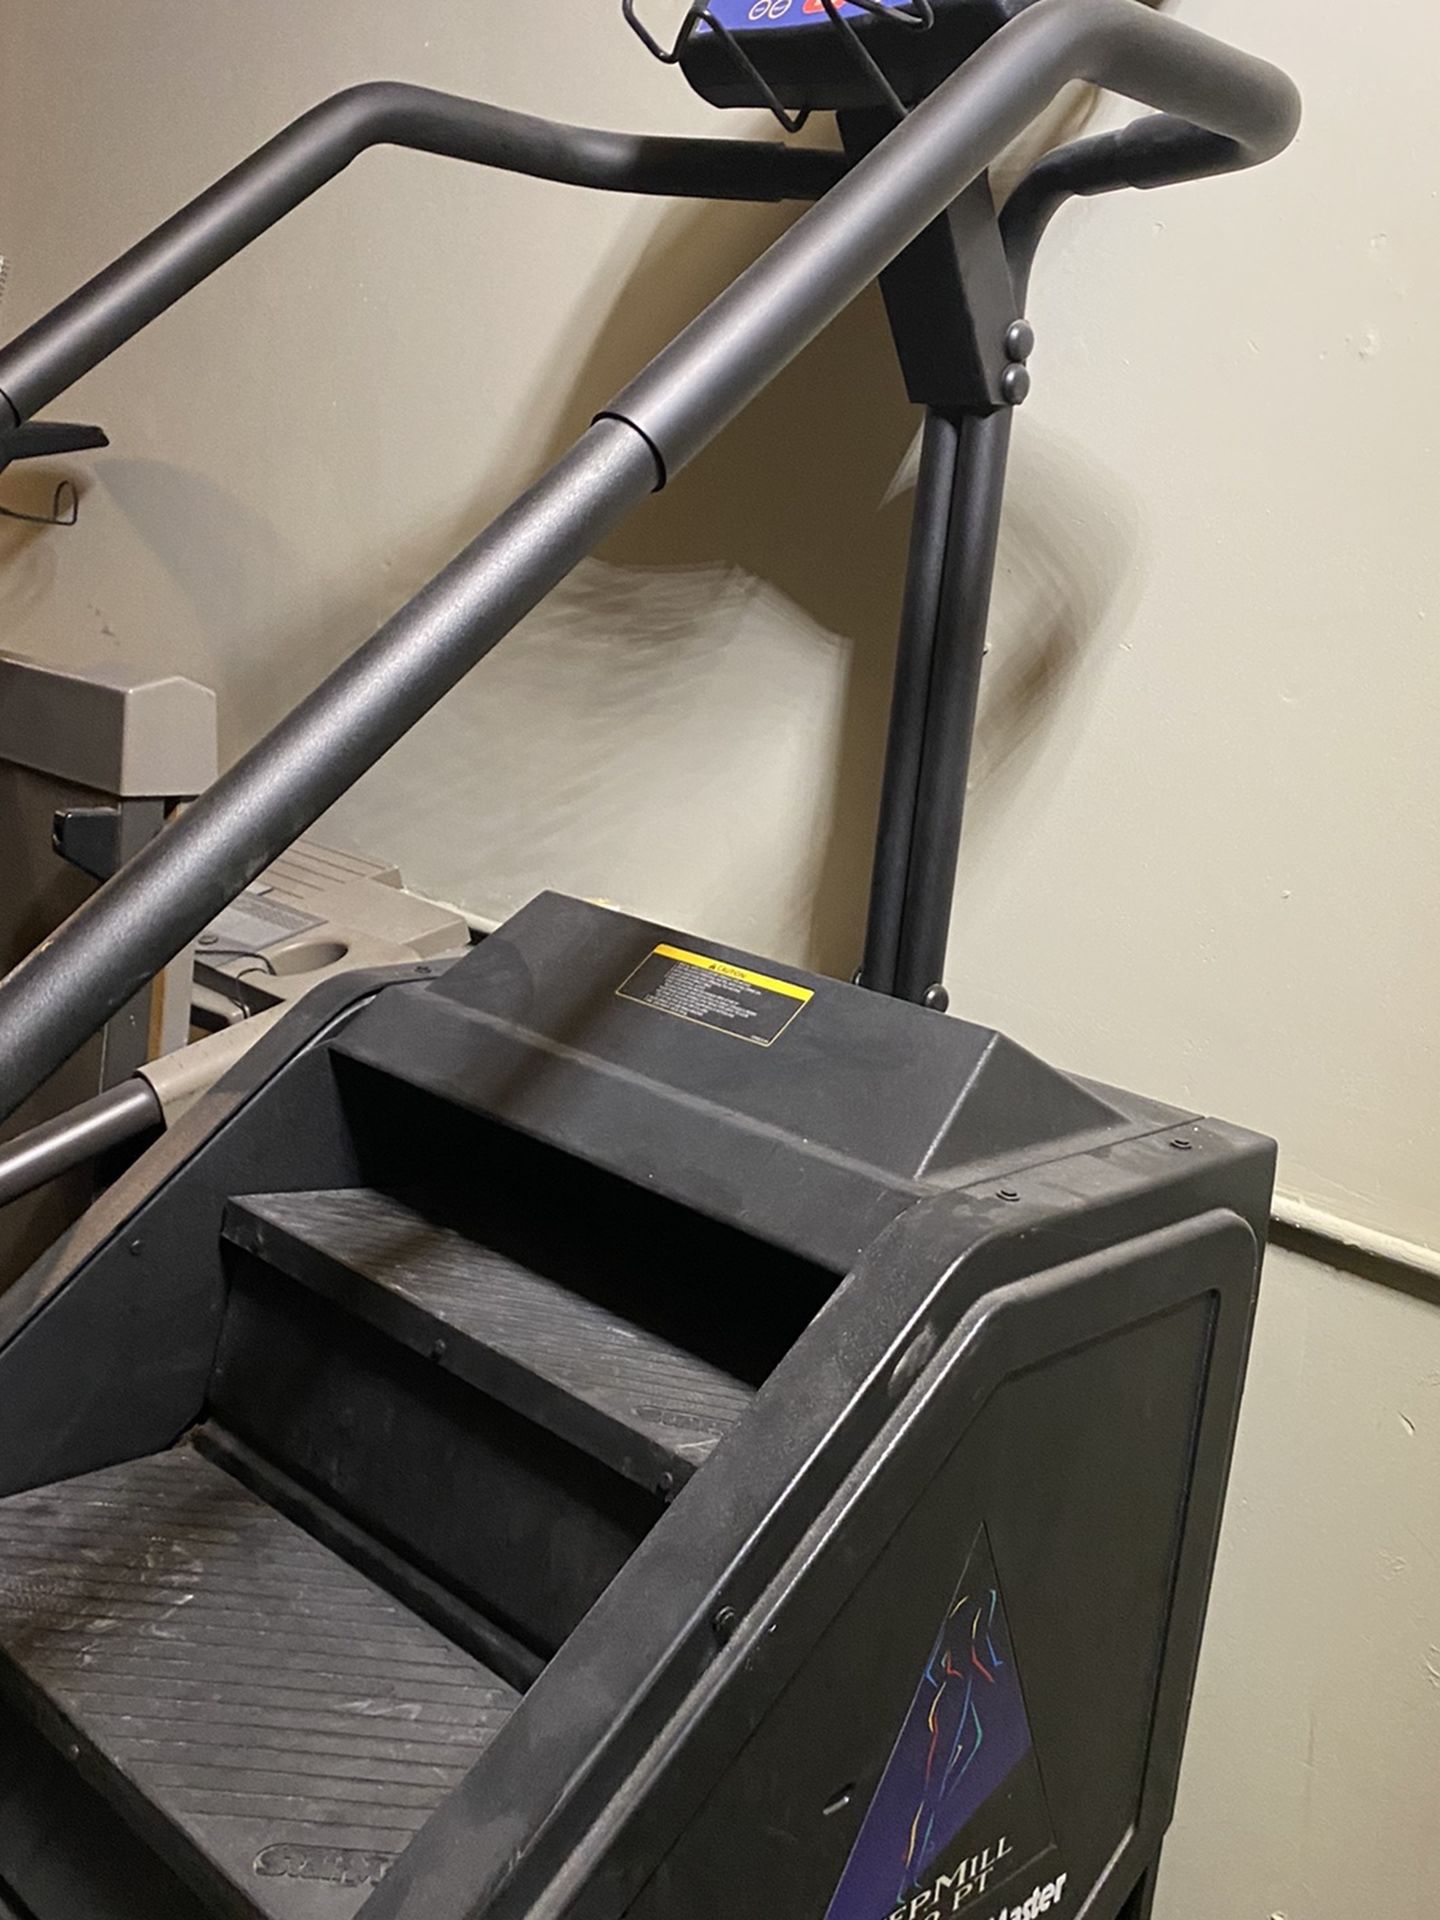 Stairmaster professional gym equipment